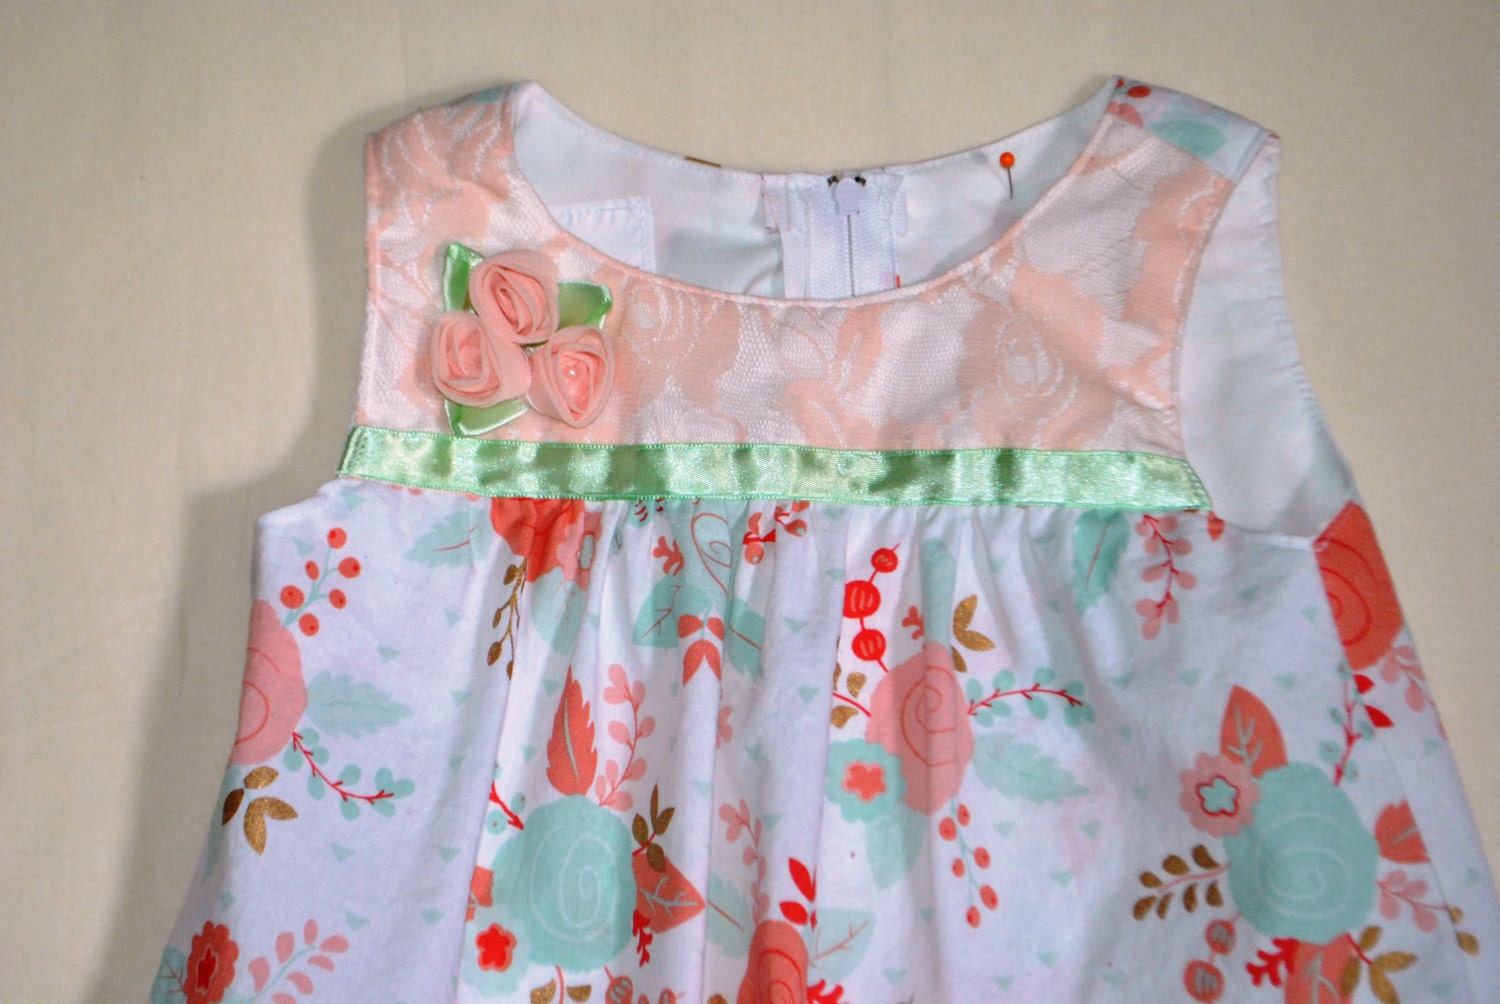 Peach Lace Toddler Dress Sizes 2T to 5T